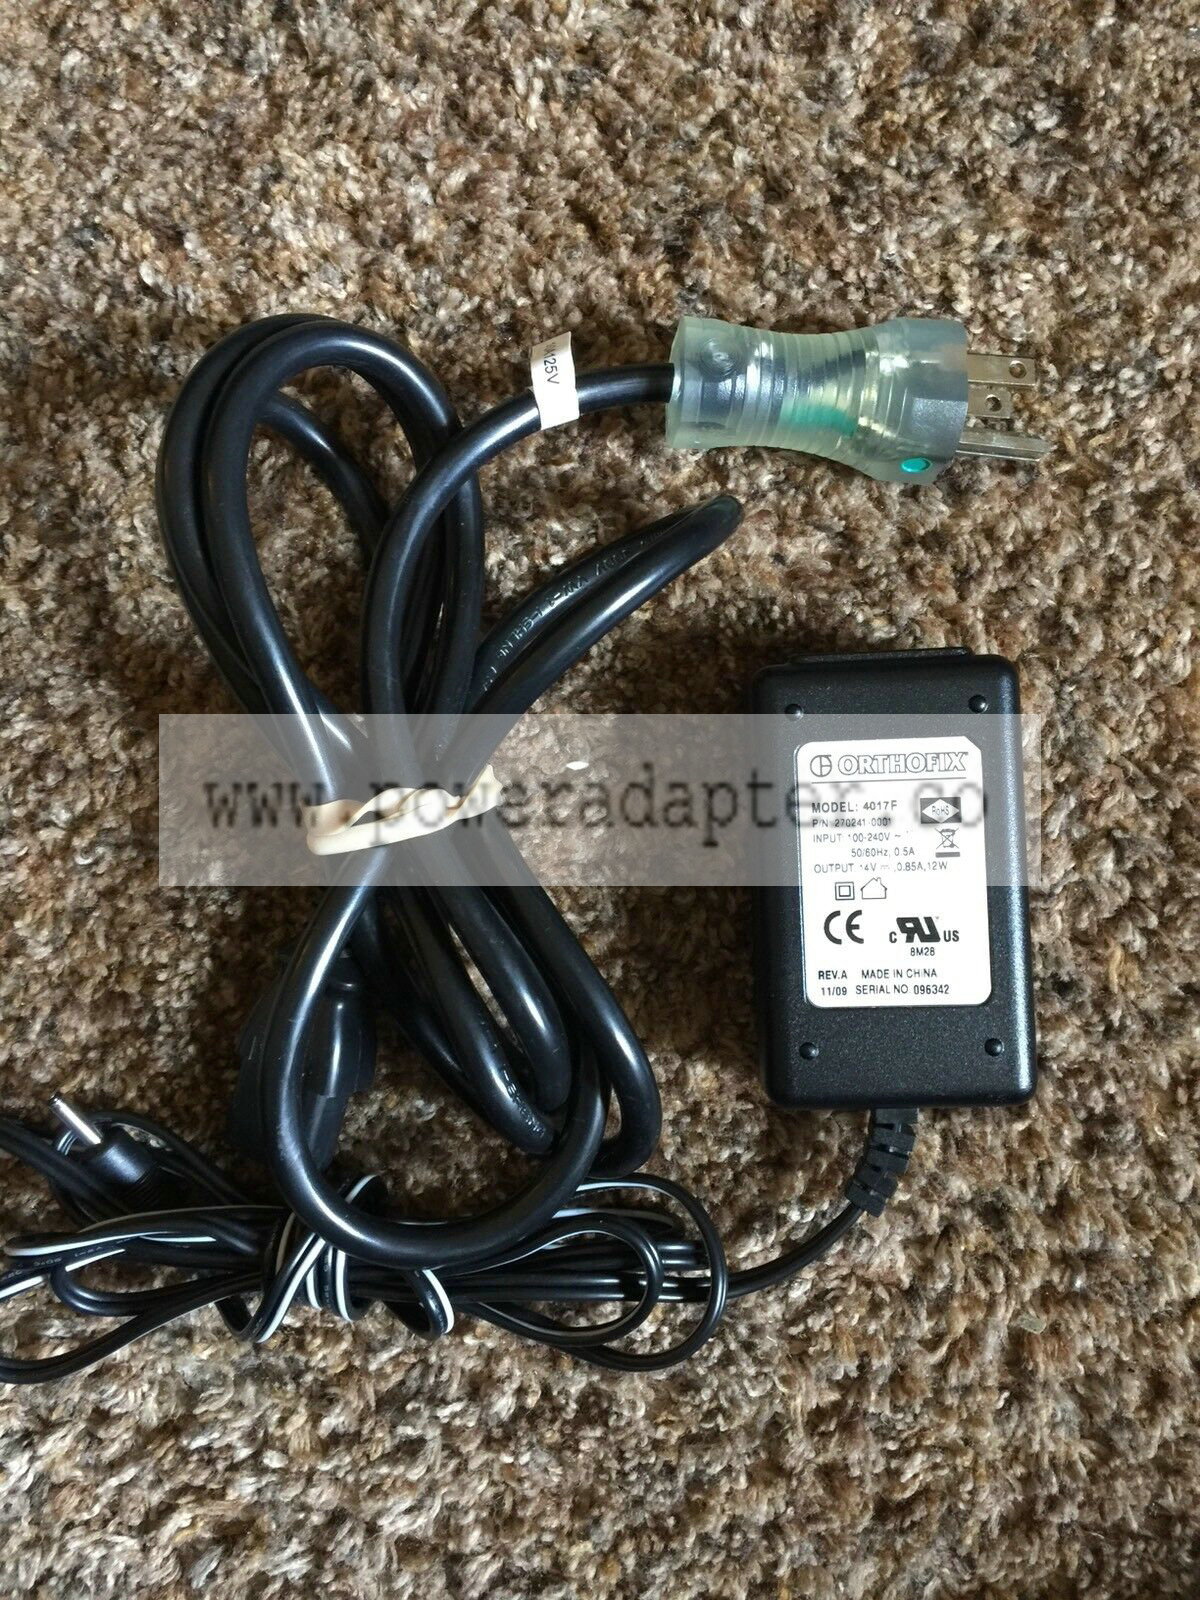 Orthofix AC Adapter Power Supply Cord 4017F 14v 0.85A For 2212/2505/3202 Brand: Orthofix MPN: 270241-0001 Model: 4 - Click Image to Close